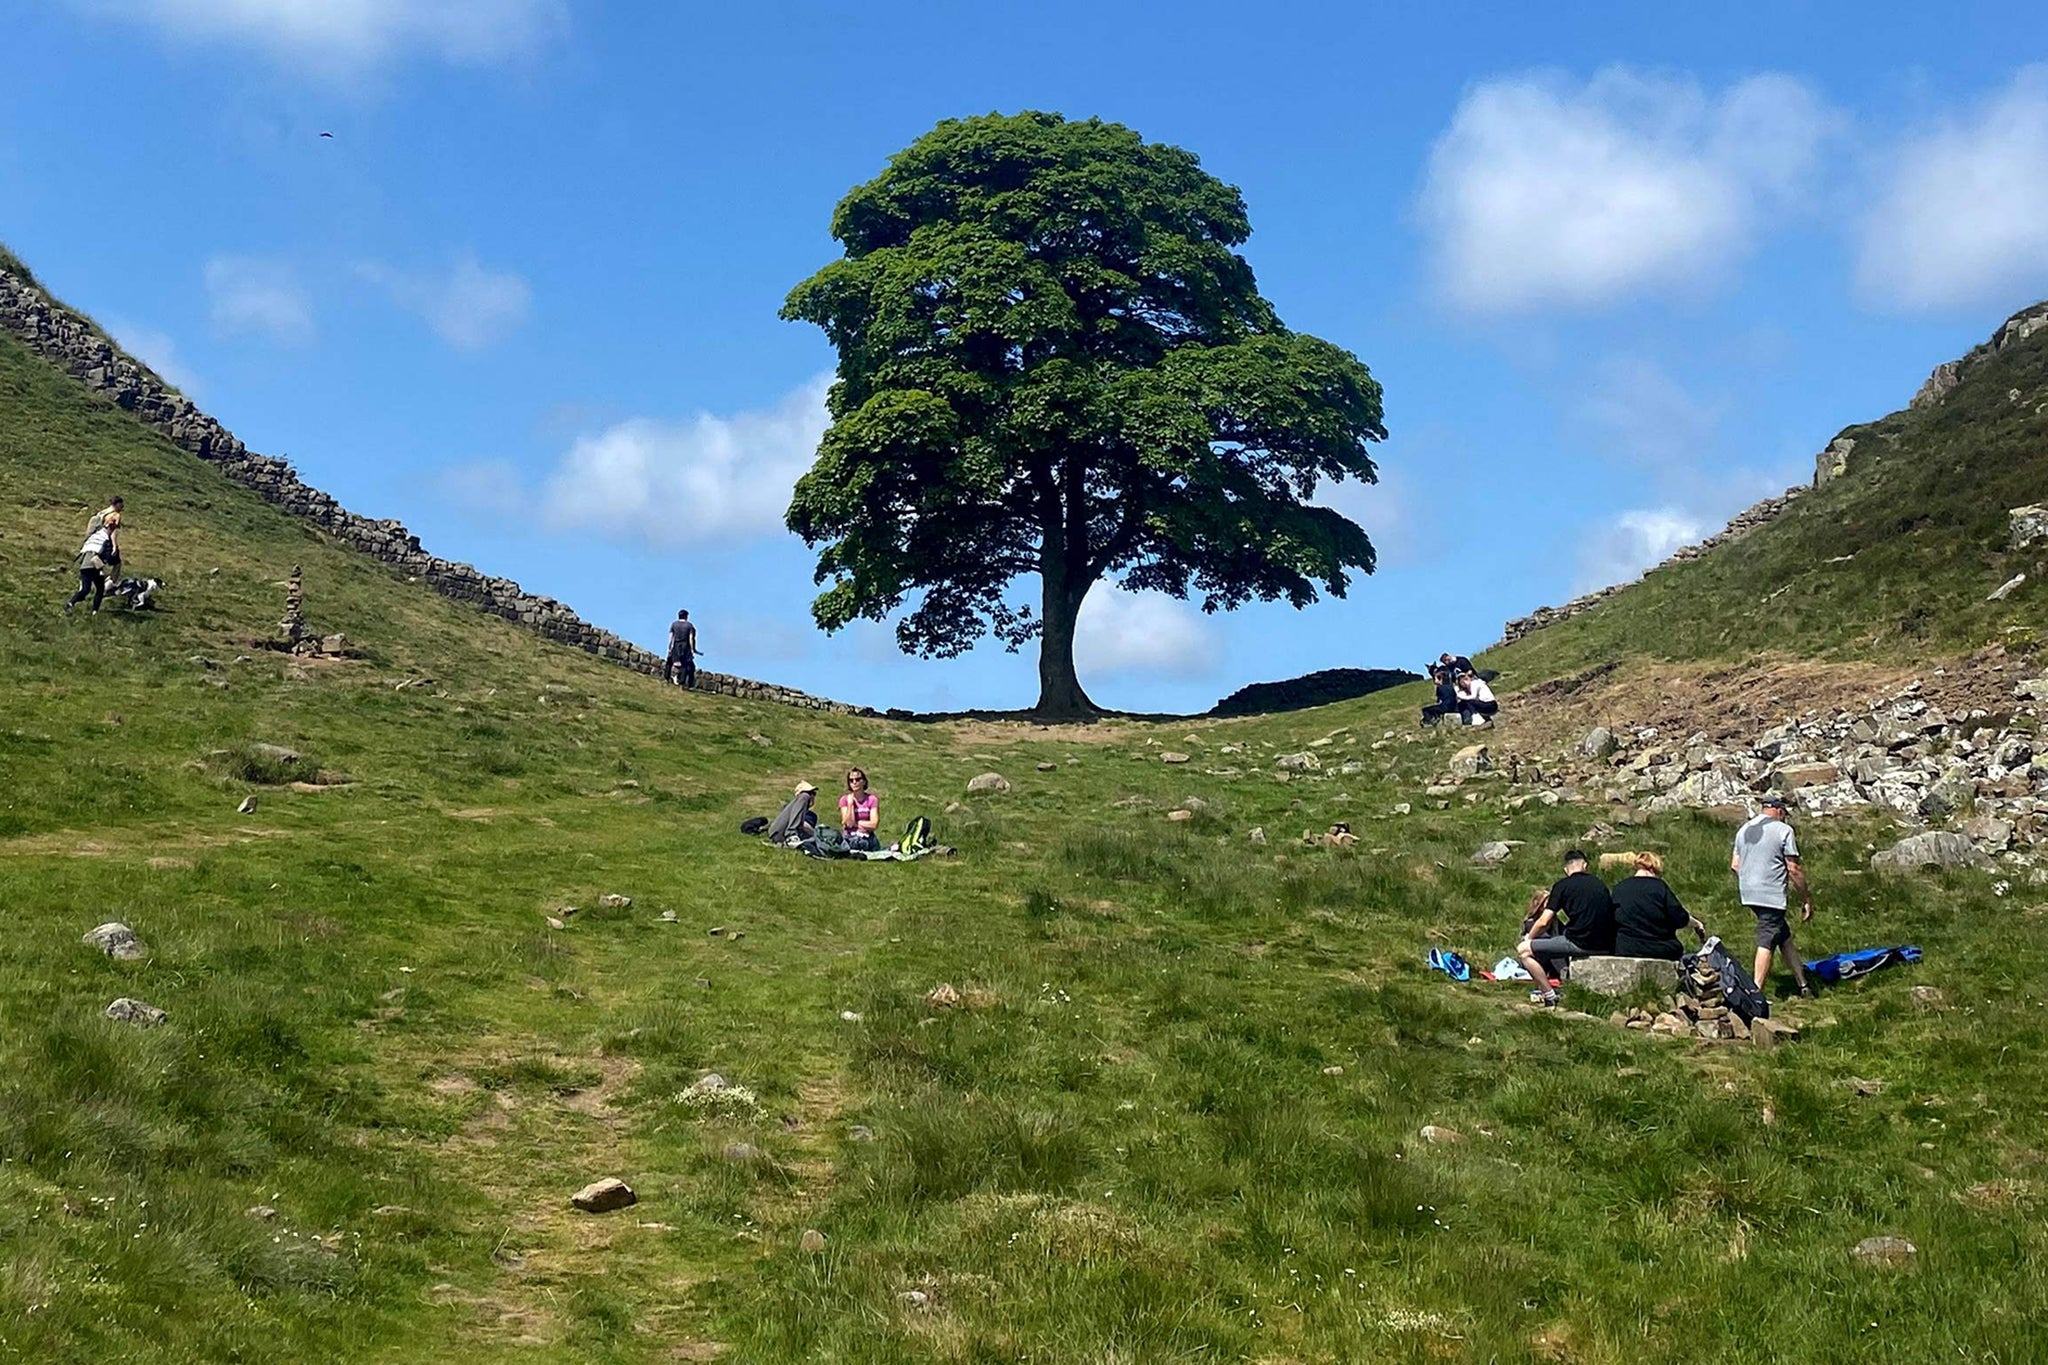 The world-famous tree next to Hadrian’s Wall in Northumberland